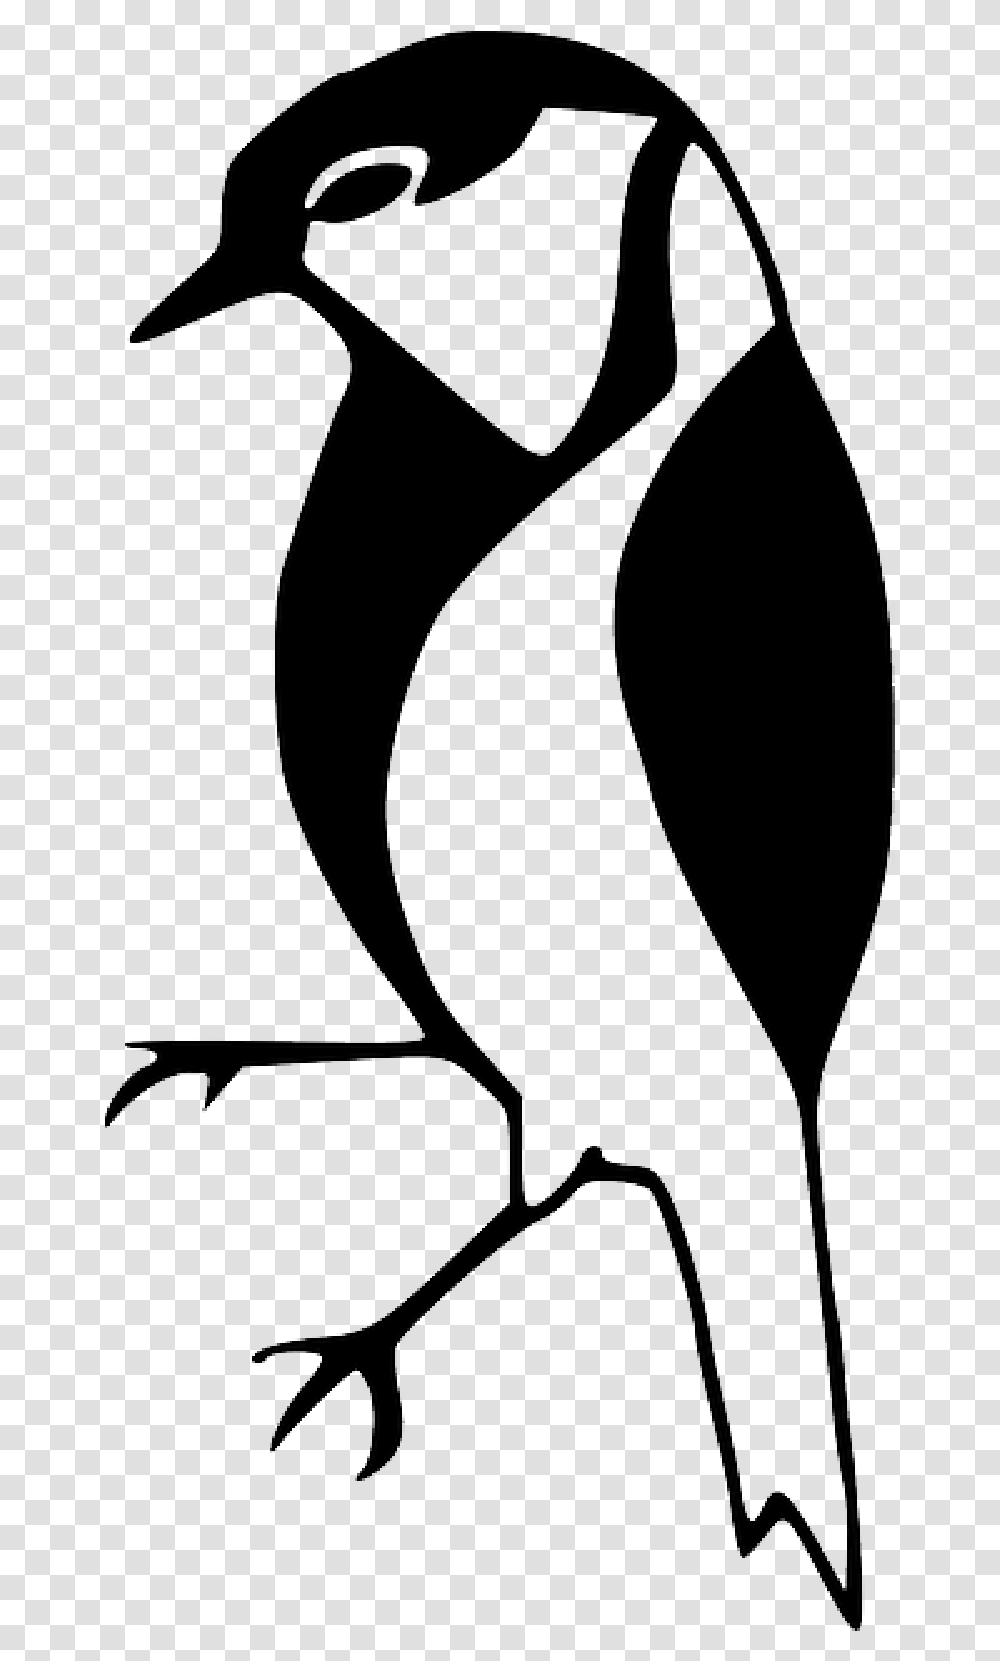 Silhouette Little Bird Wings Beak Feathers Black And White Image Bird, Animal, Bow, Pet, Mammal Transparent Png